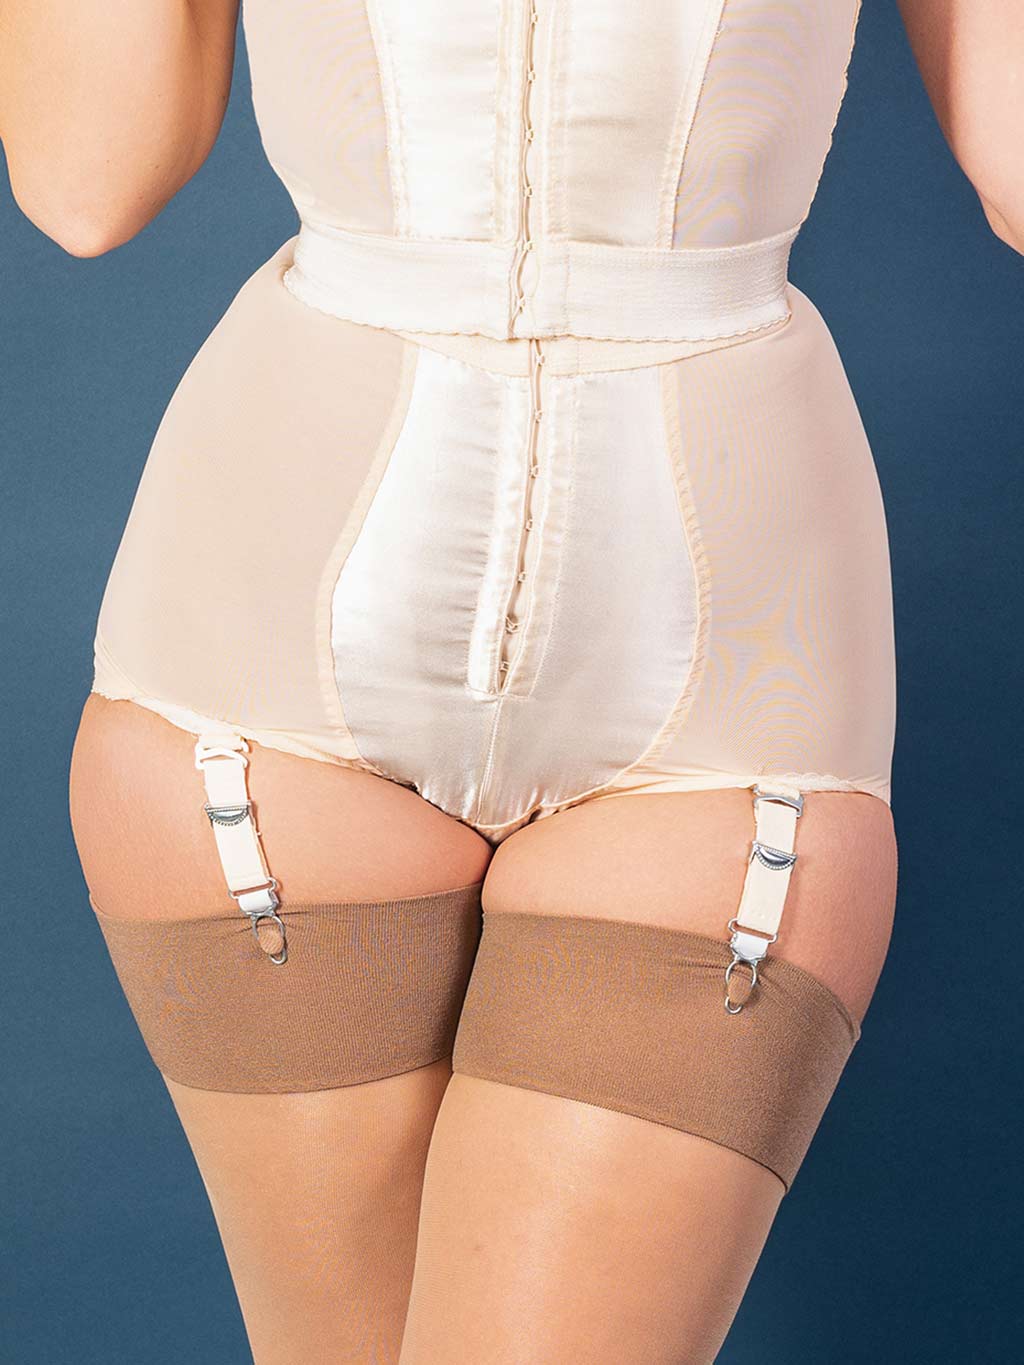 Just Figures on X: Long live the classic long leg #panty girdle